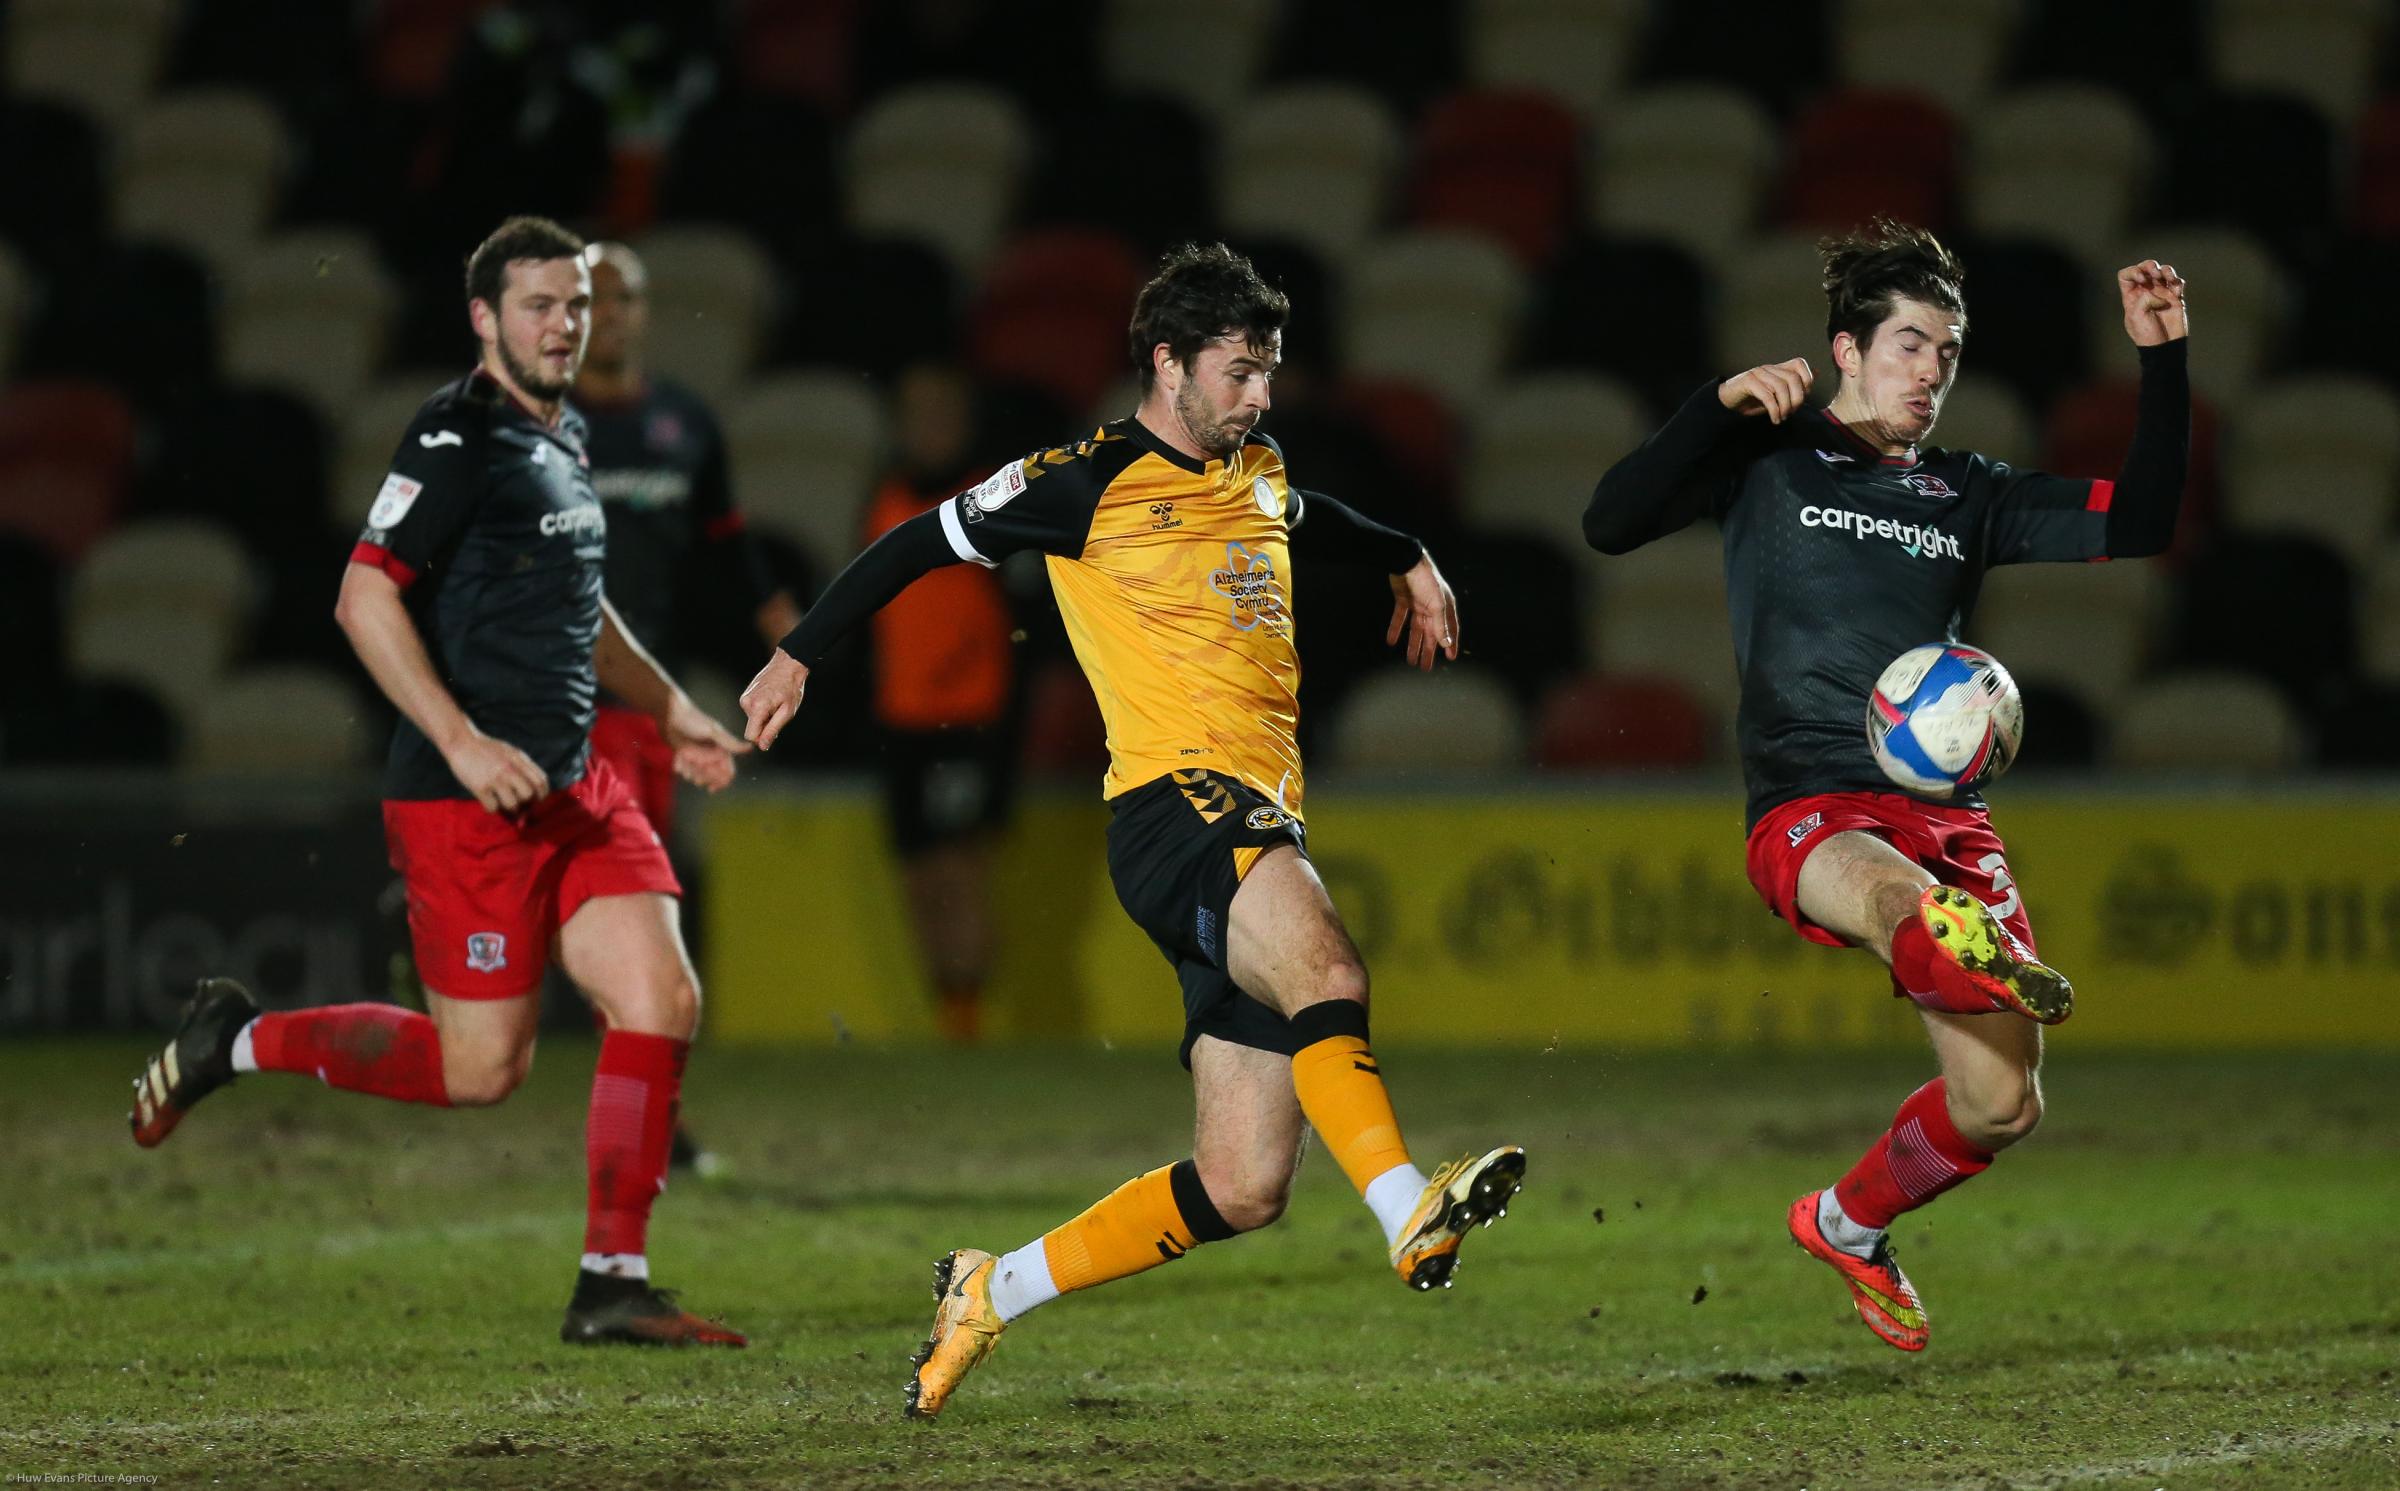 County striker Padraig Amond in action against Exeter in February